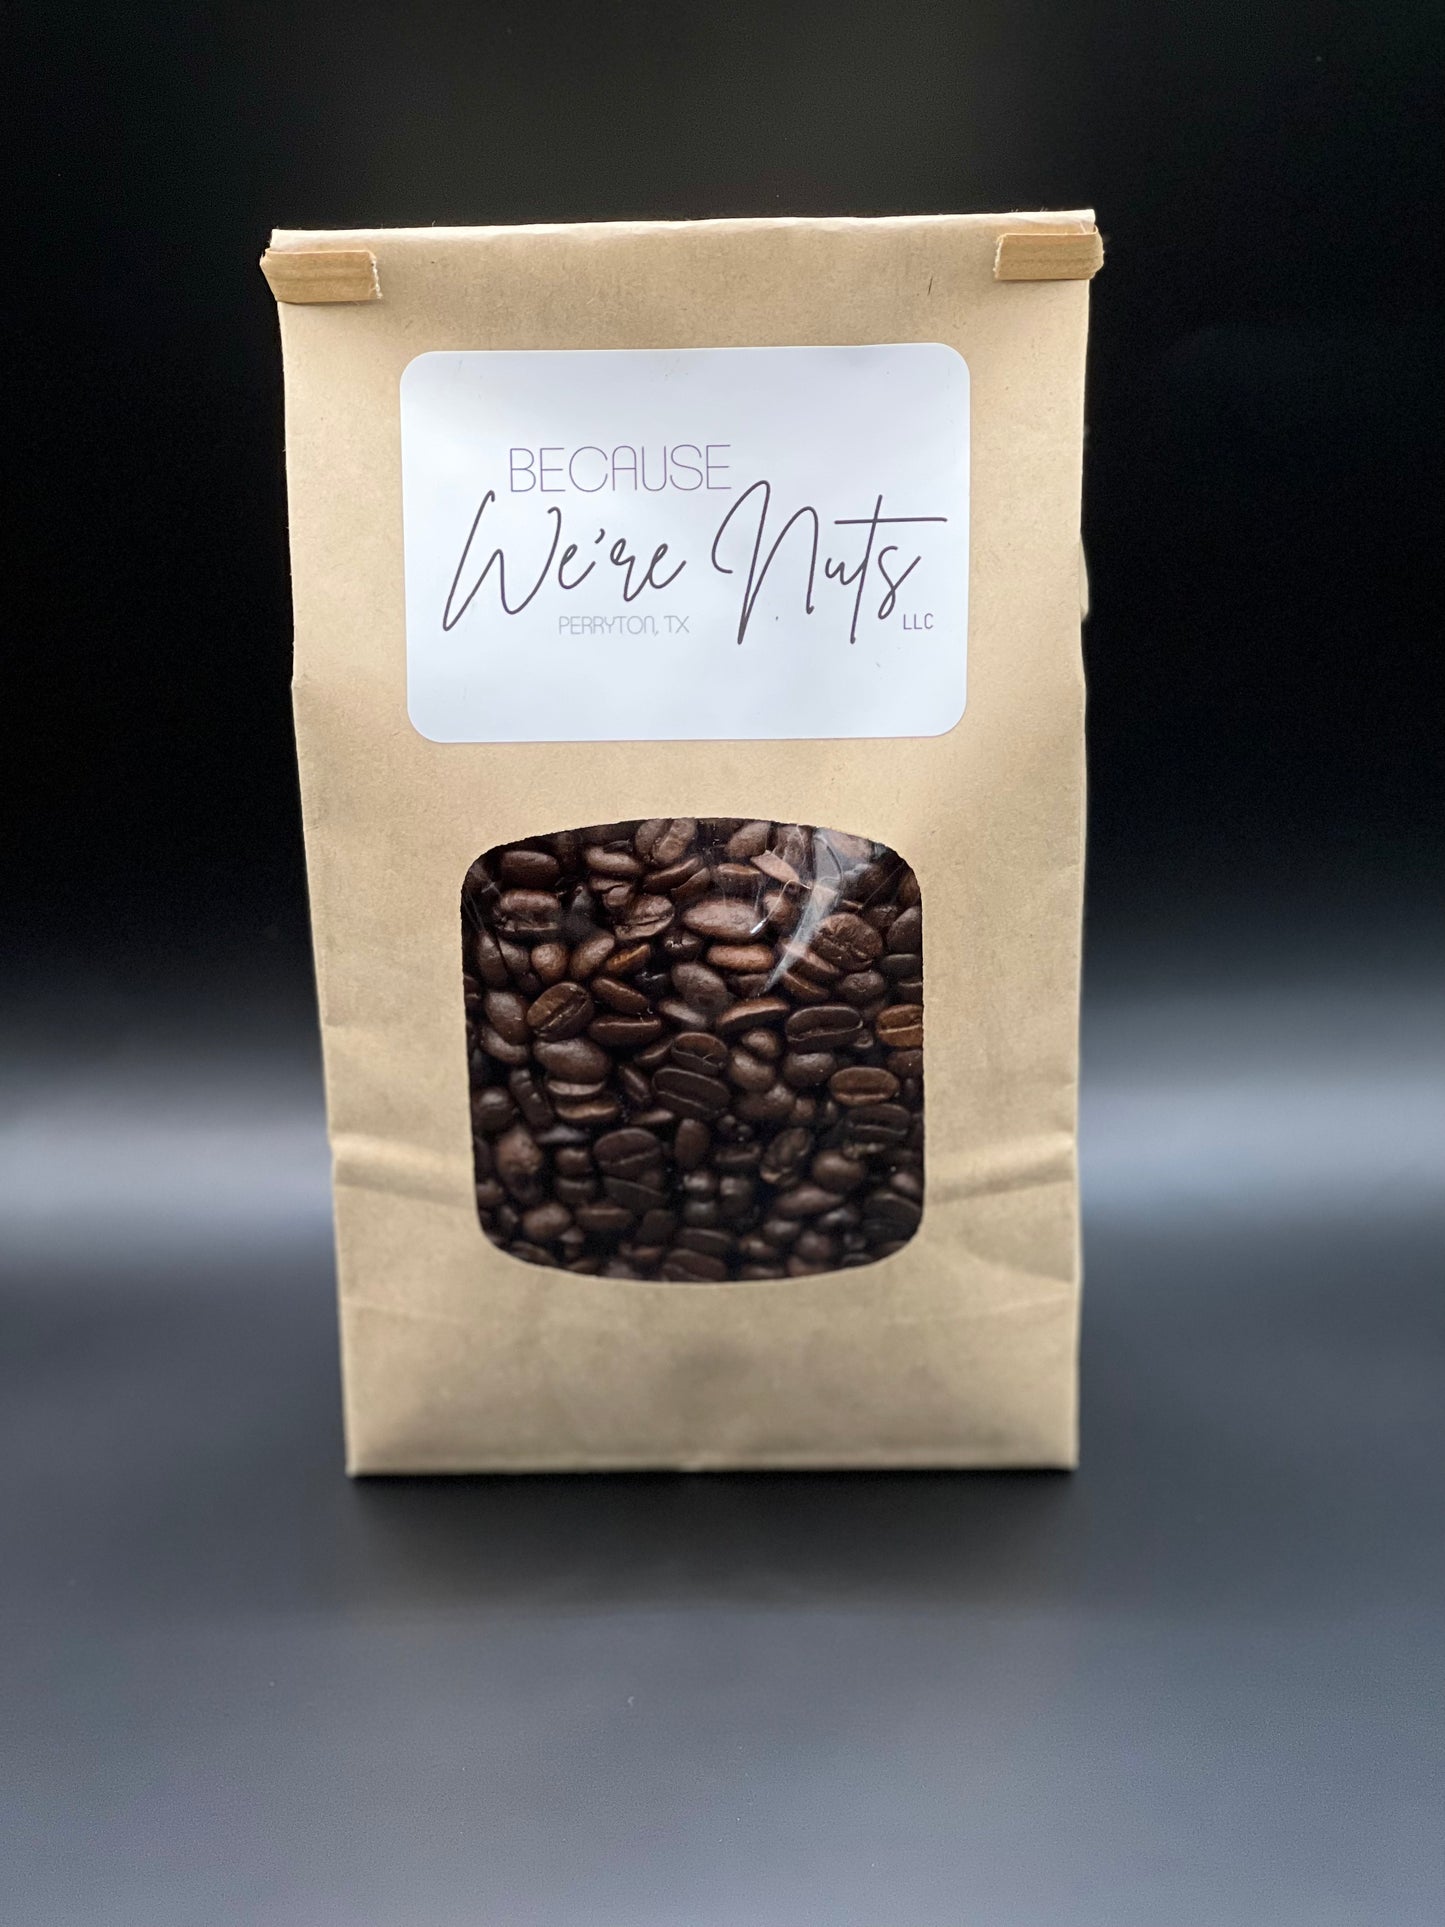 House Blend Whole Coffee Beans